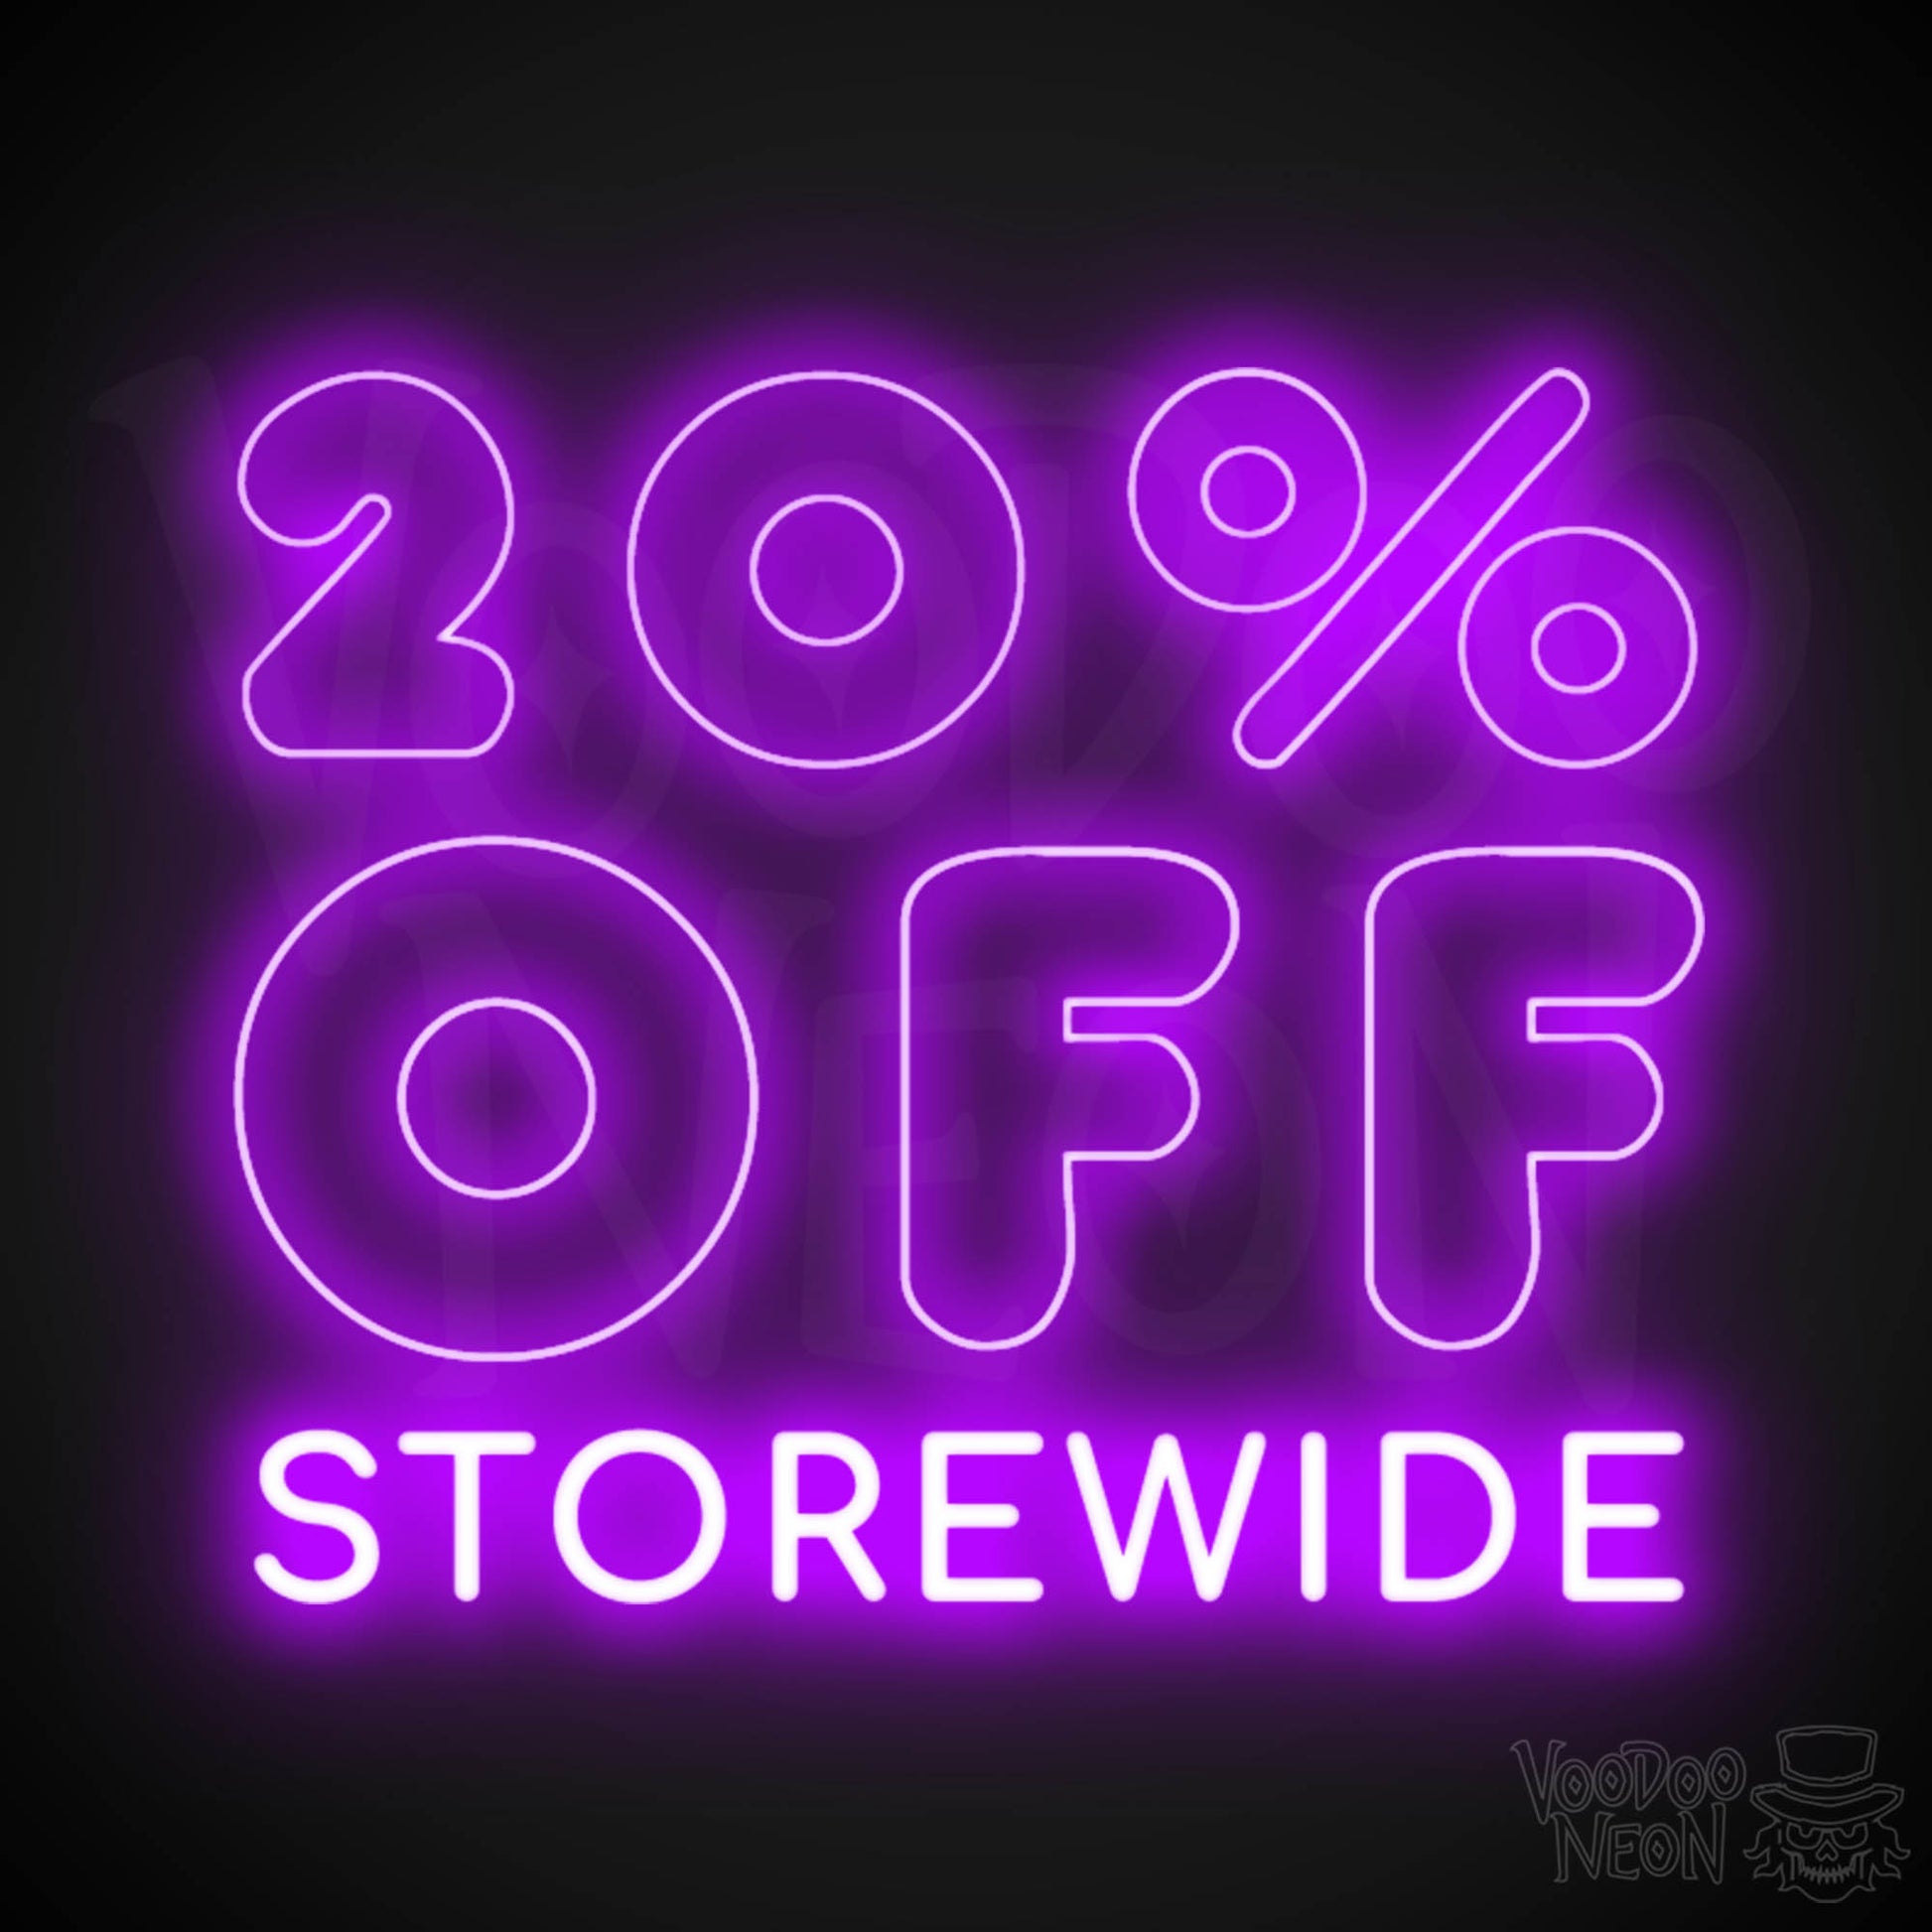 20% Off Storewide Neon Sign - 20% Off Storewide Sign - LED Shop Sign - Color Purple